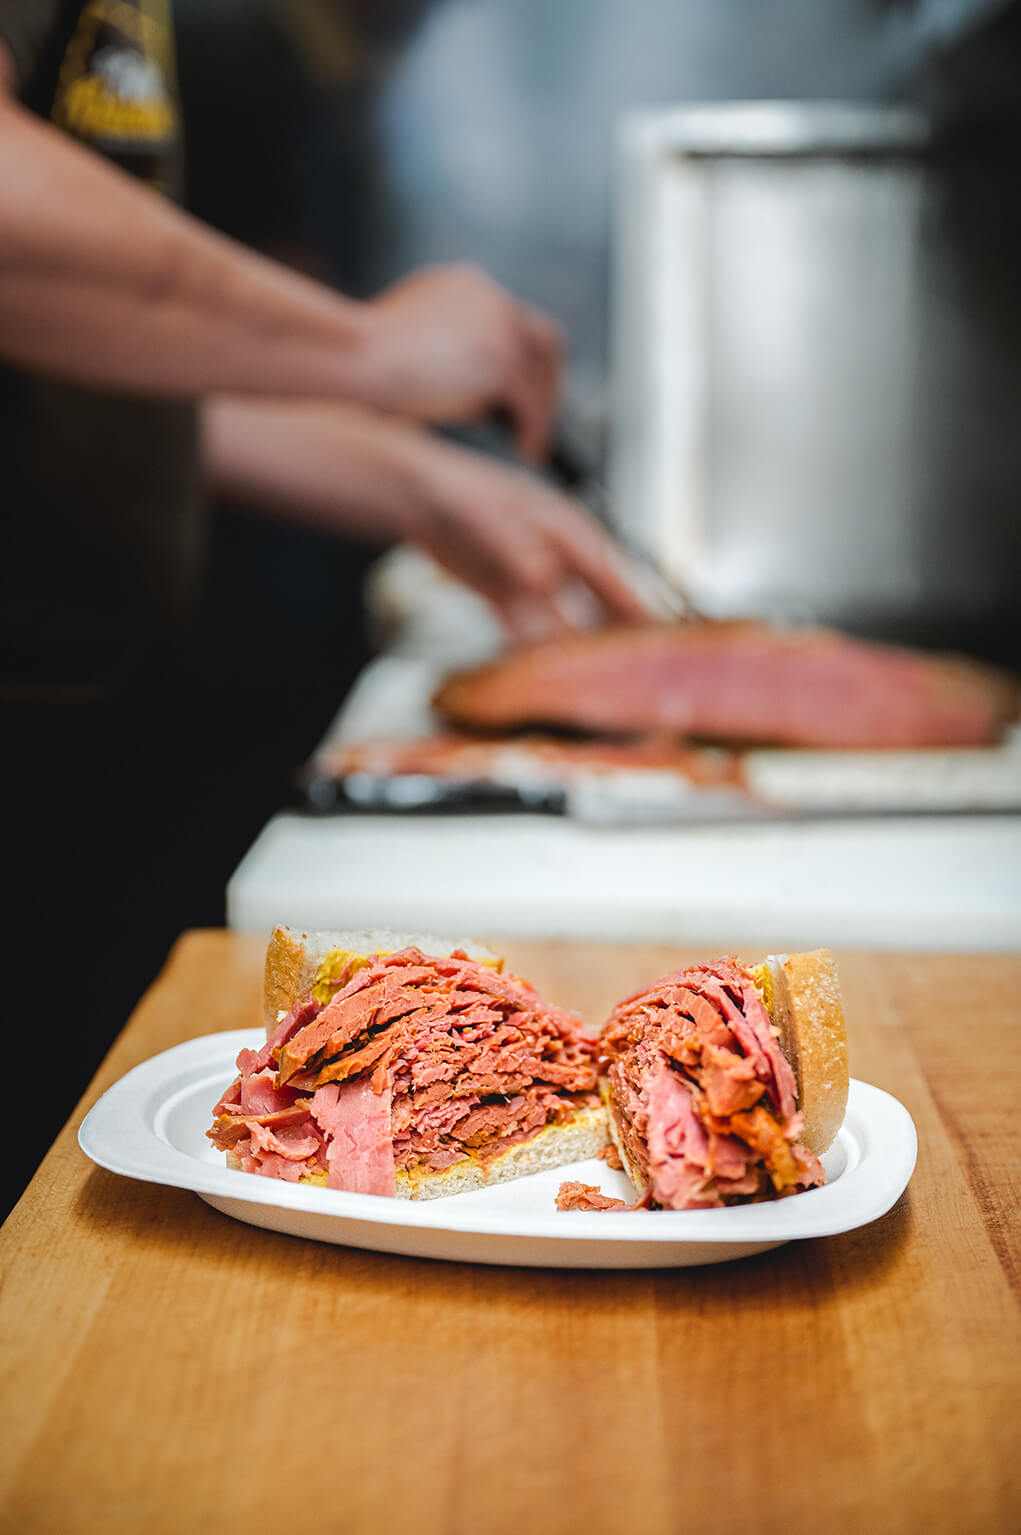 Smoked meat sandwich on a white plate in fast-food restaurant kitchen